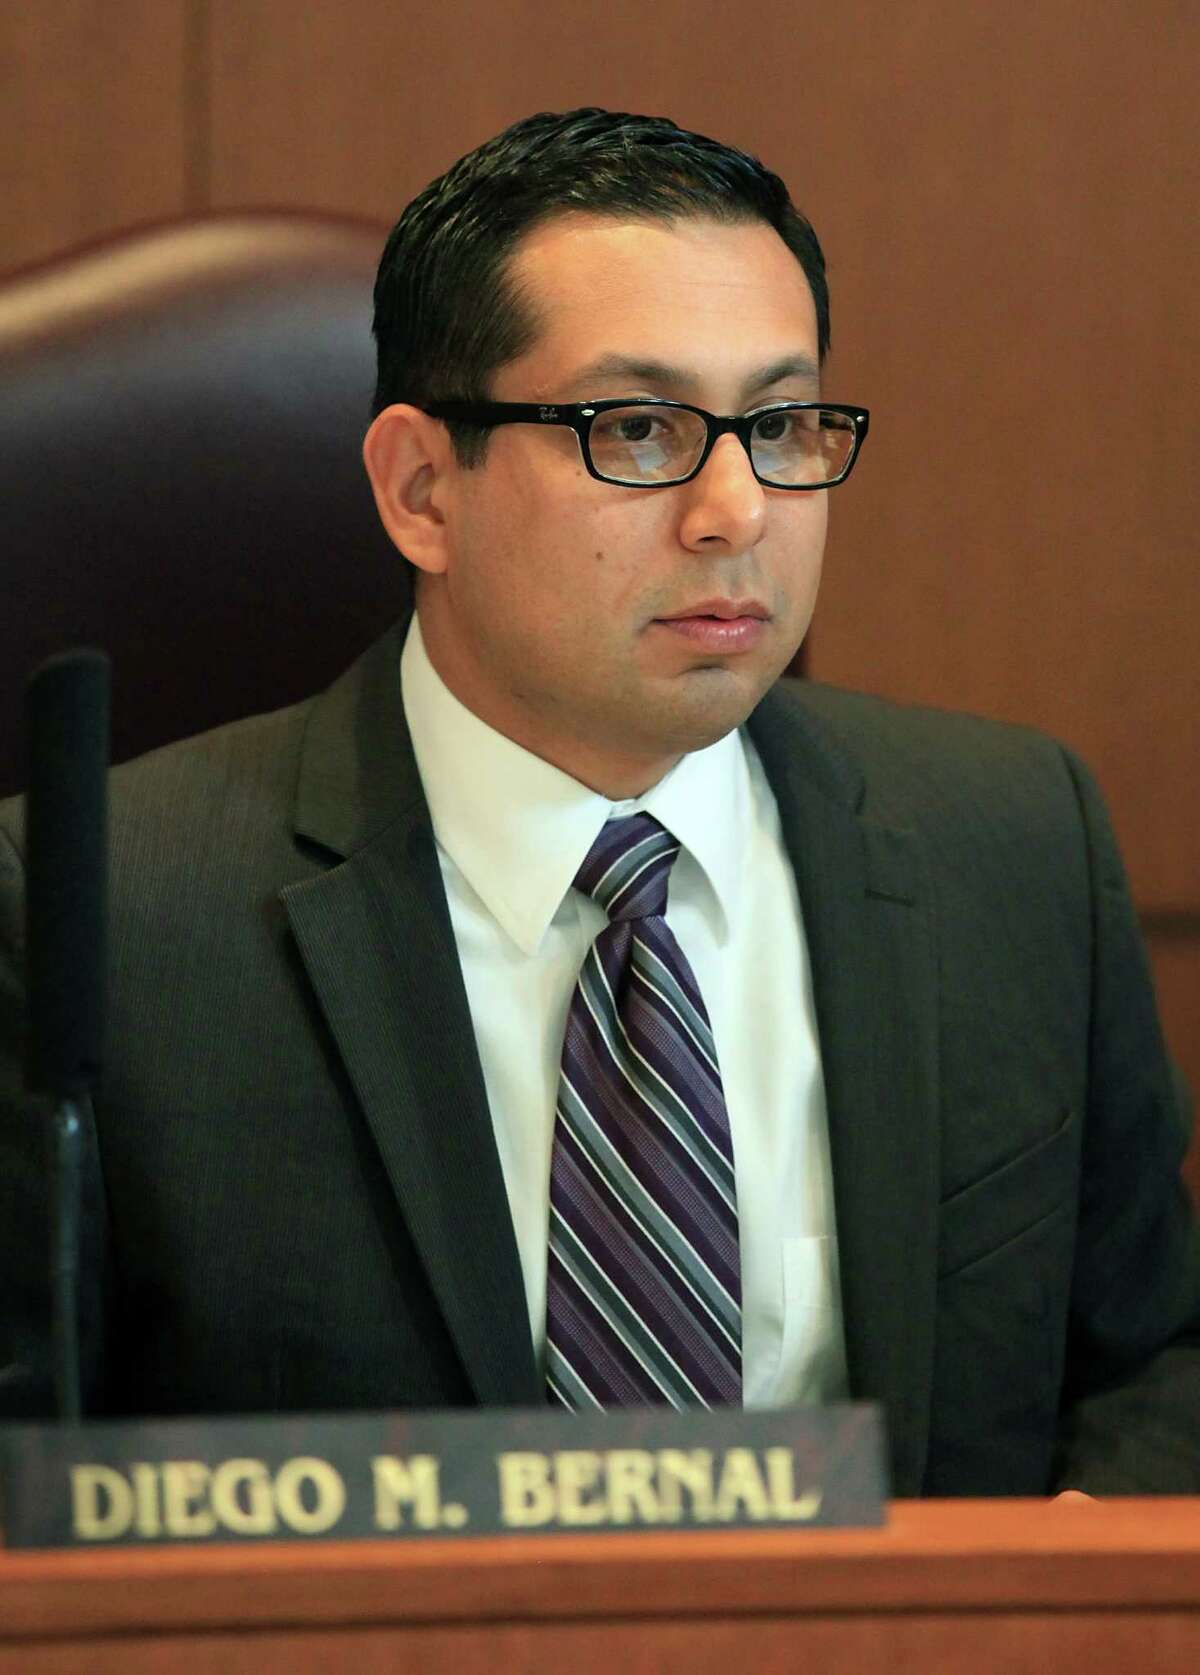 City Councilman Diego M. Bernal has led the local effort to reform regulation of the payday and title loan business.